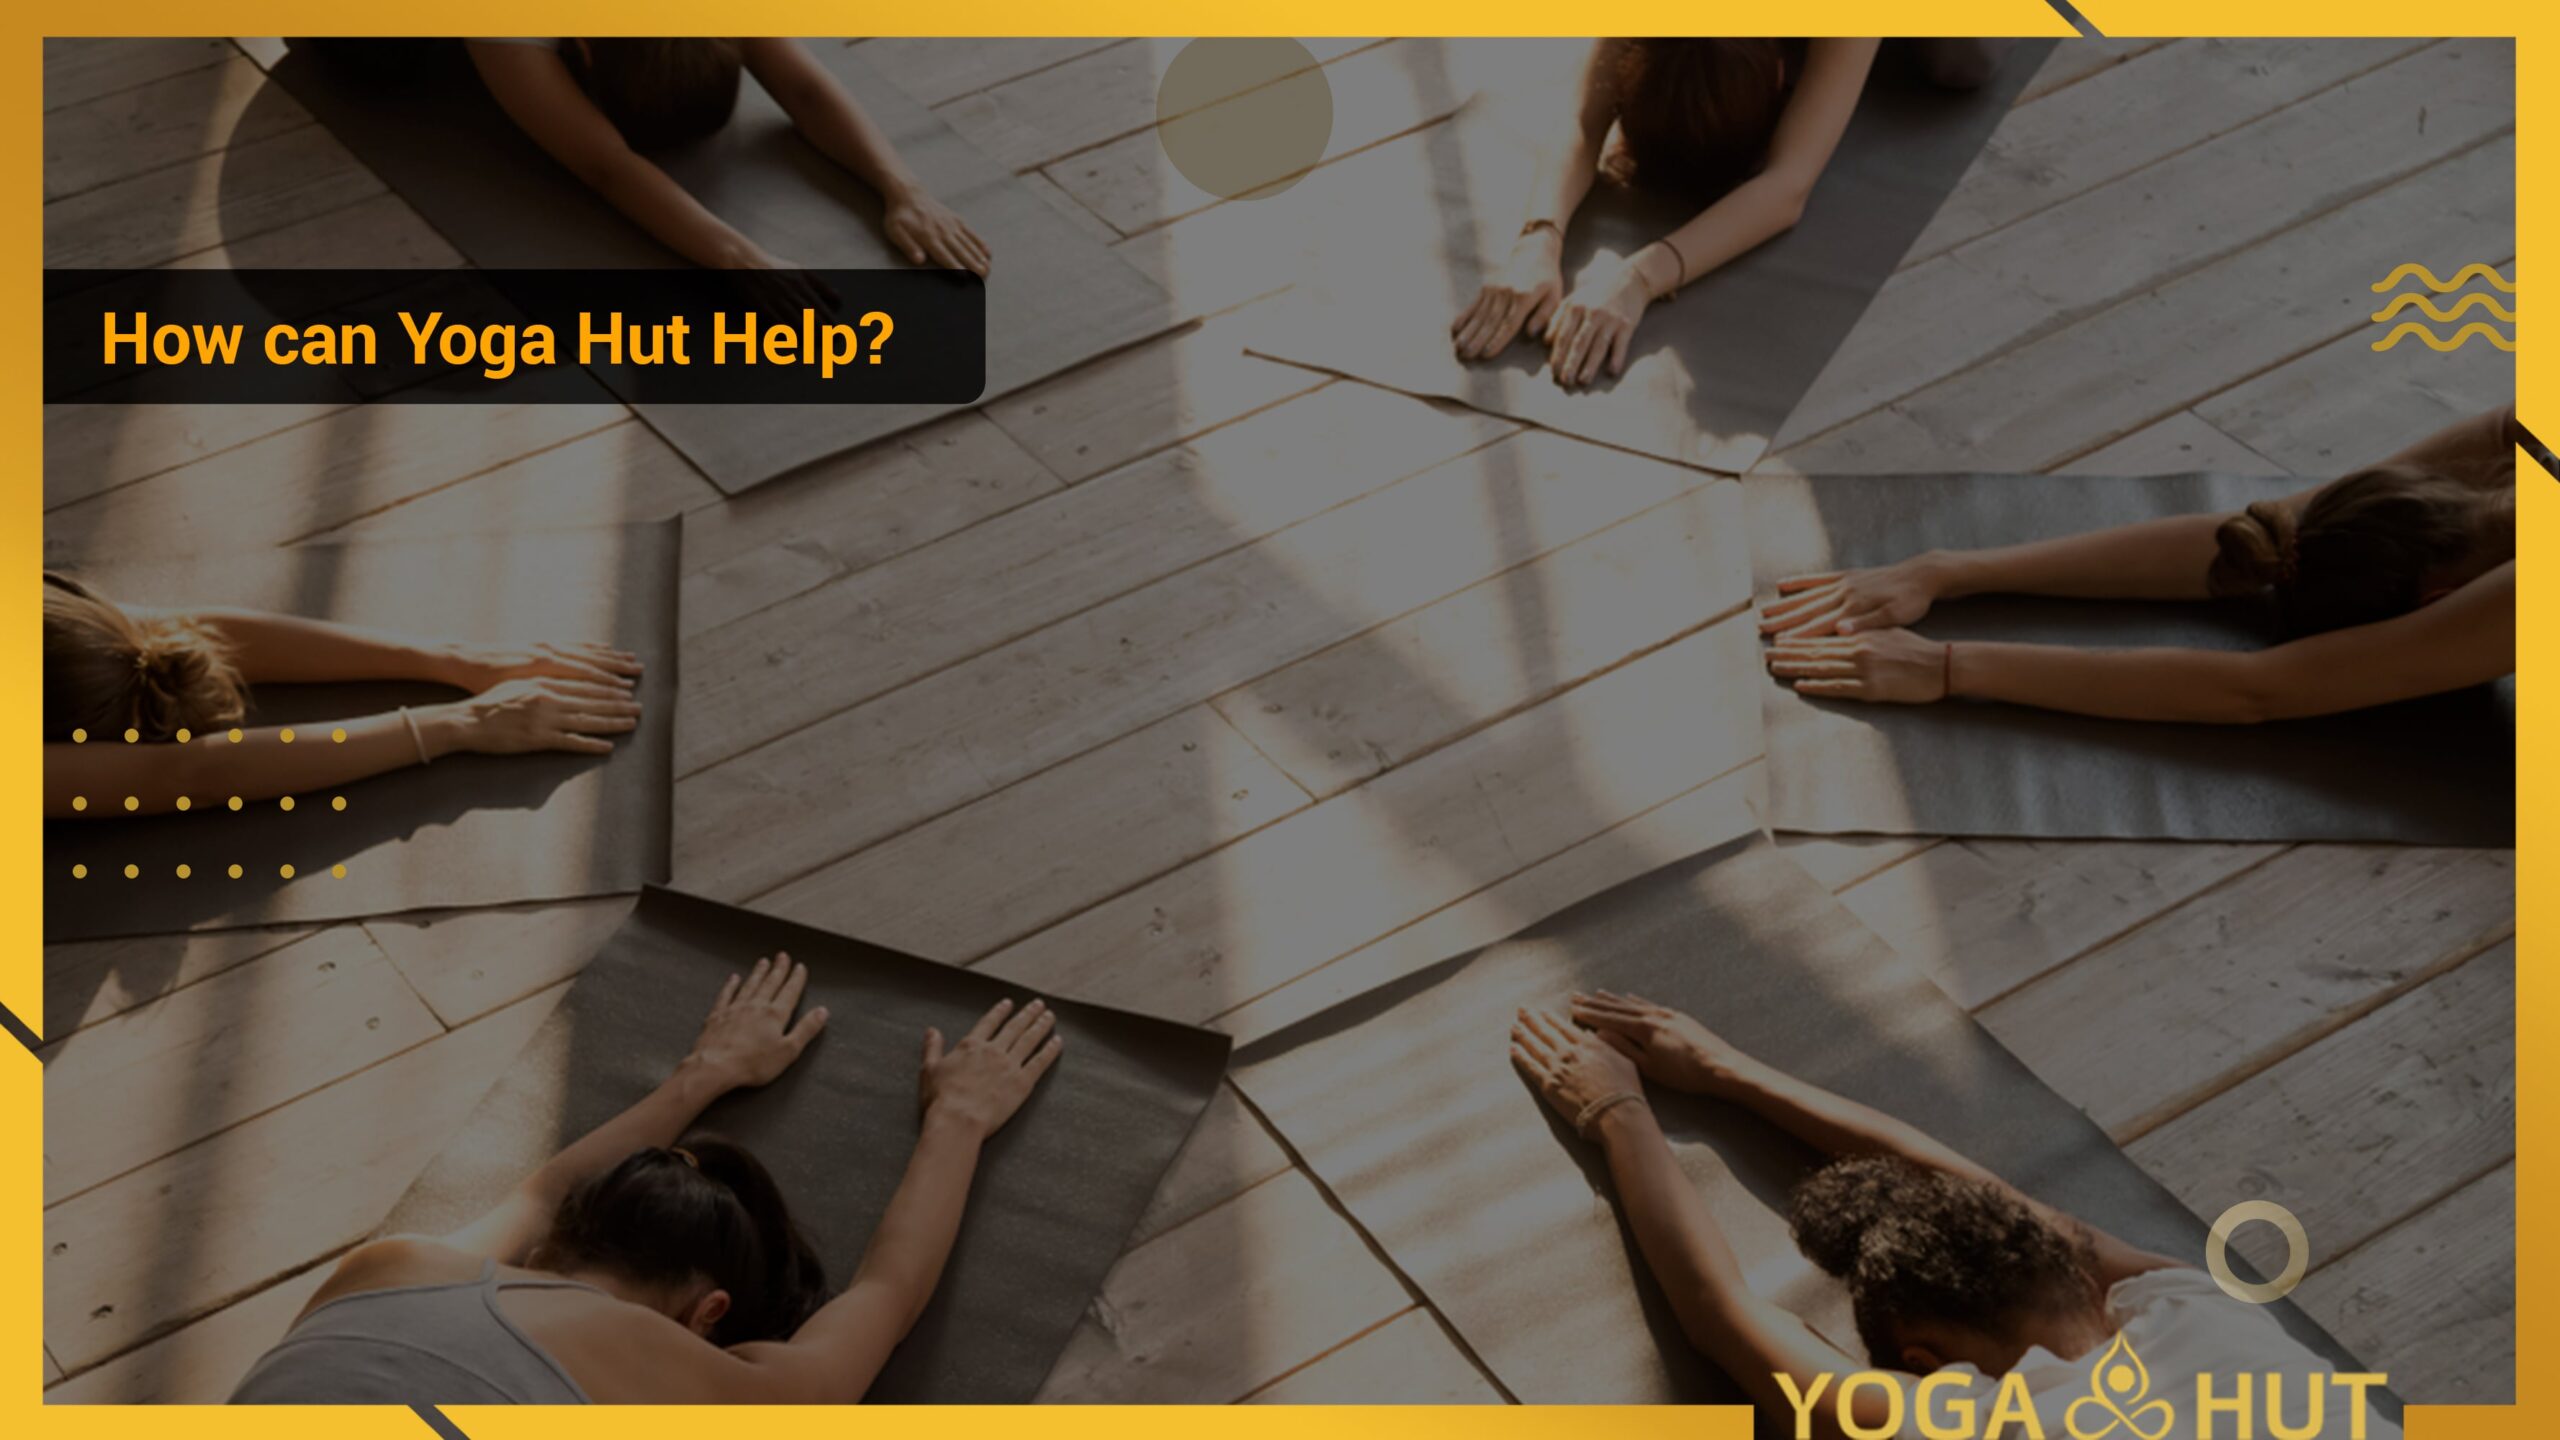 How can Yoga Hut Help an individual